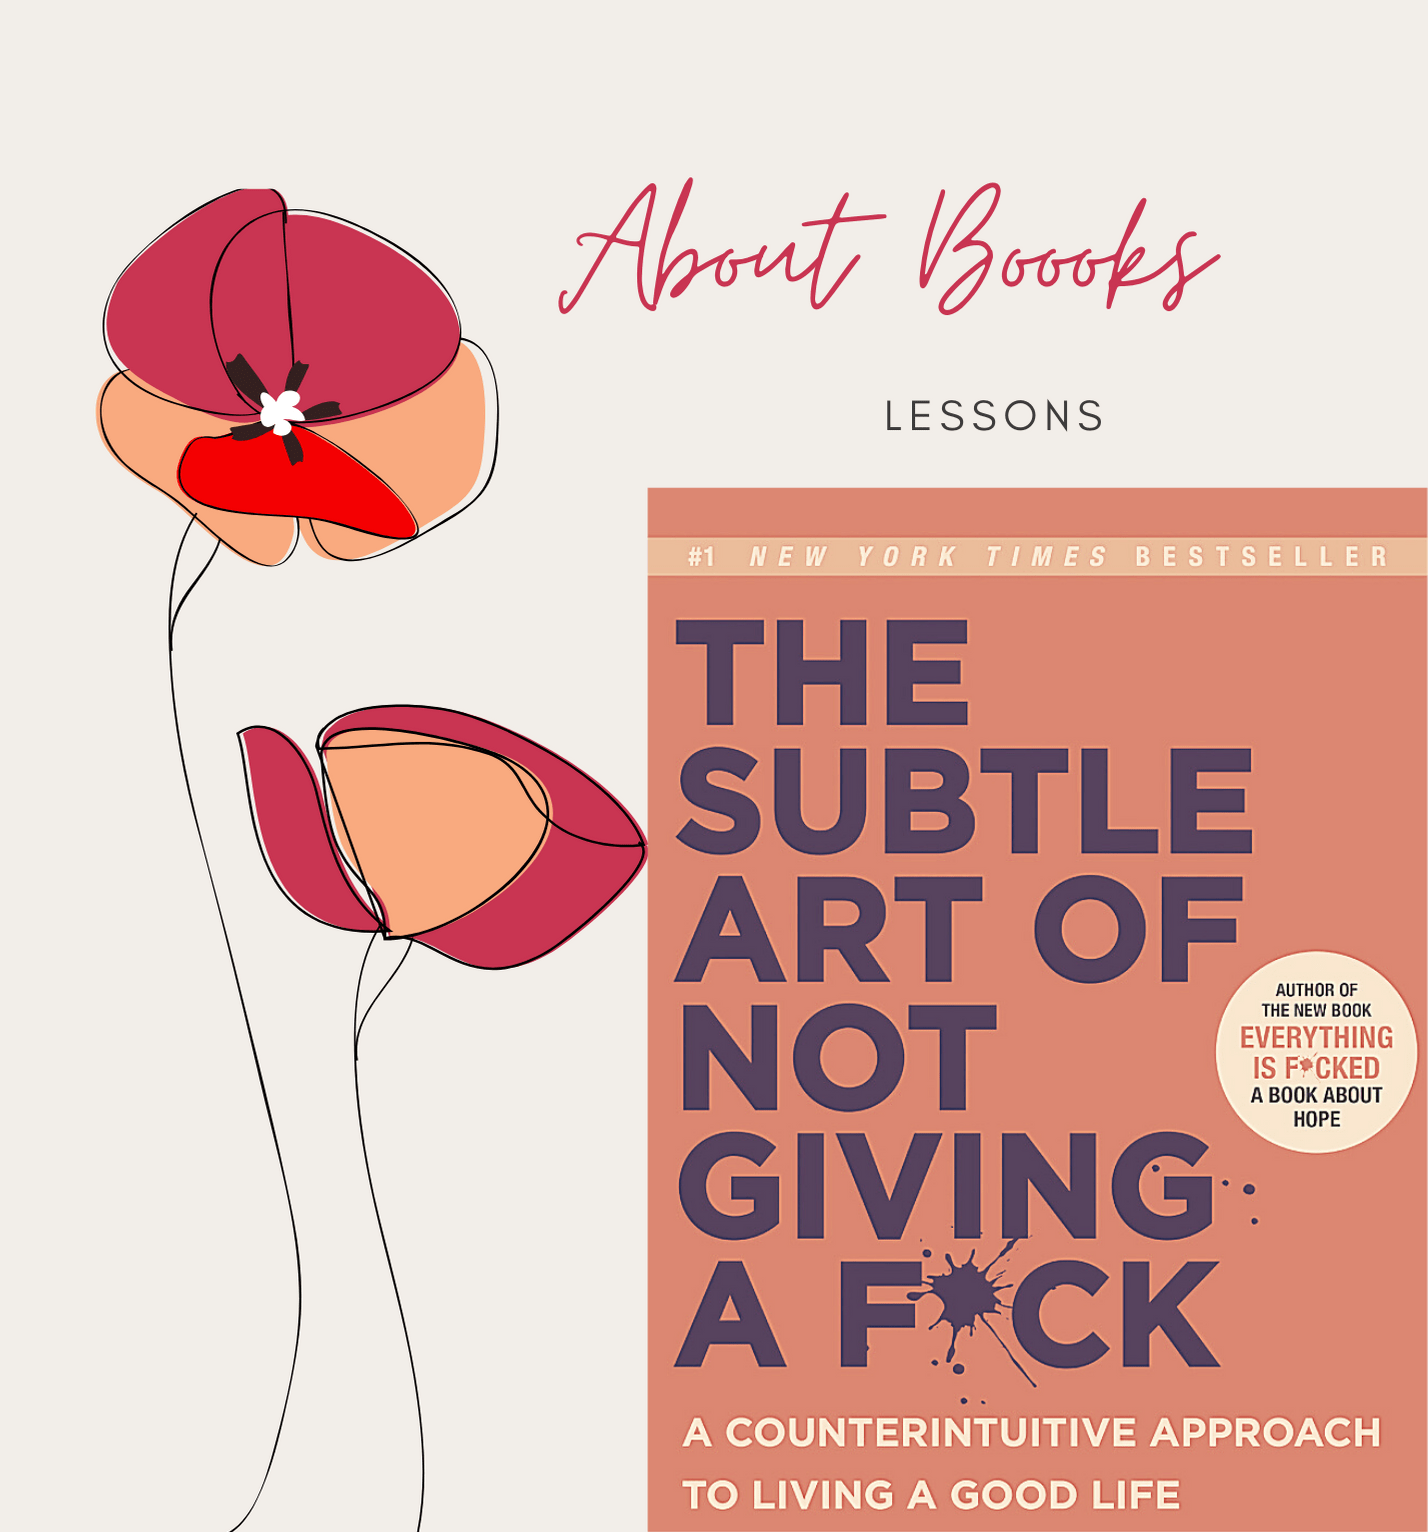 #4 Have you read The Subtle Art of Not Giving a F*ck